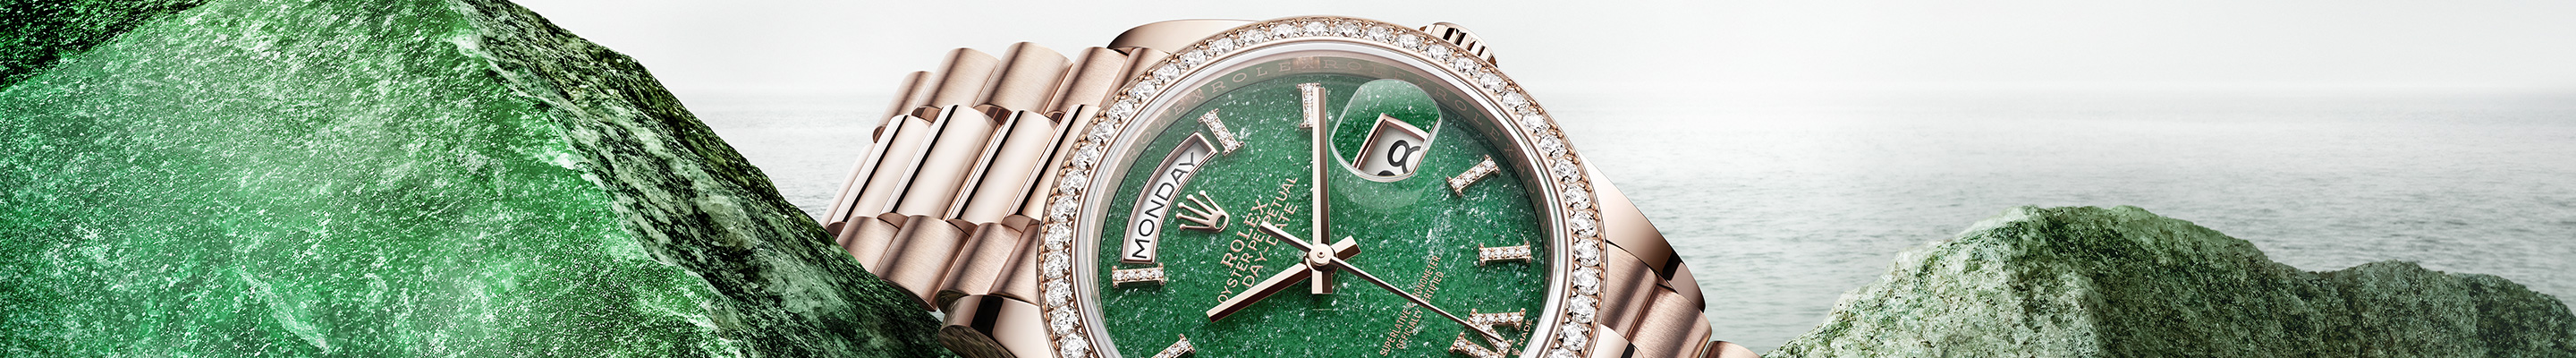 Rolex Day-Date Watches at Chow Tai Fook